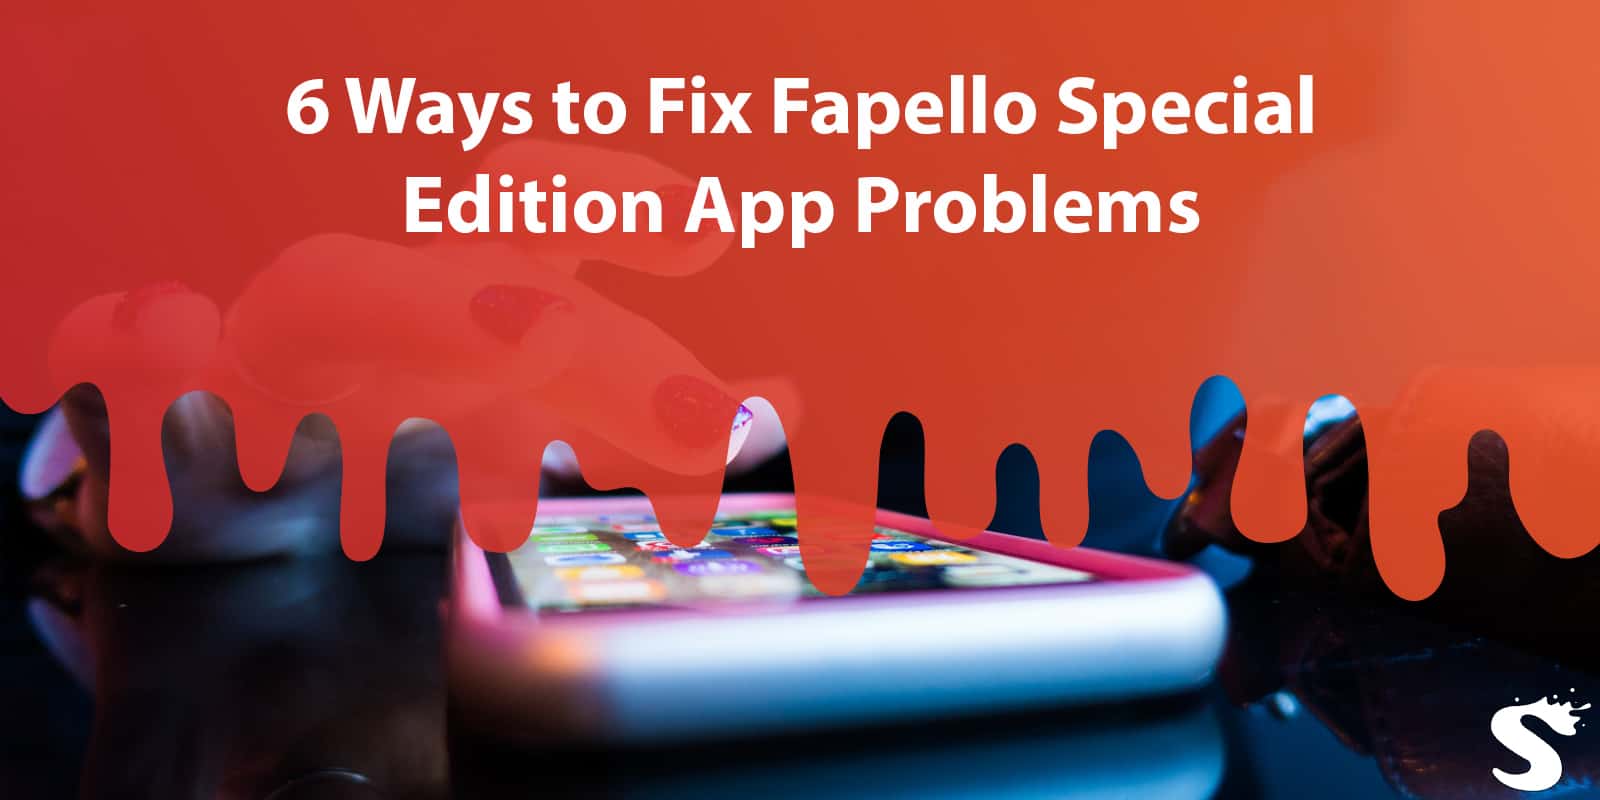 6 Ways to Fix Fapello Special Edition App Problems